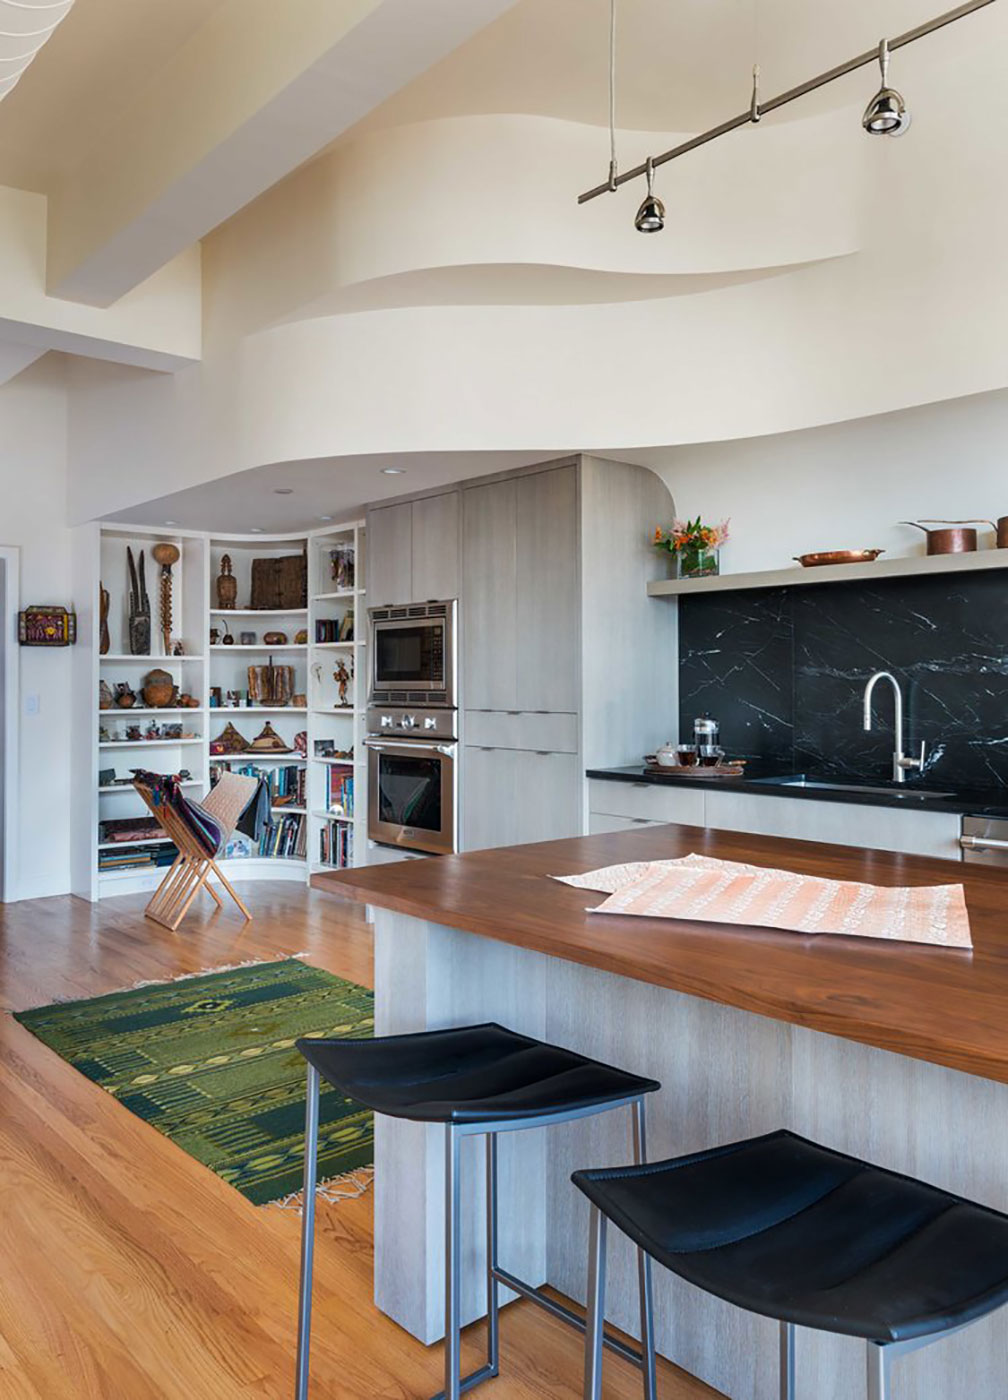 Contemporary makeover for an artist's loft kitchen